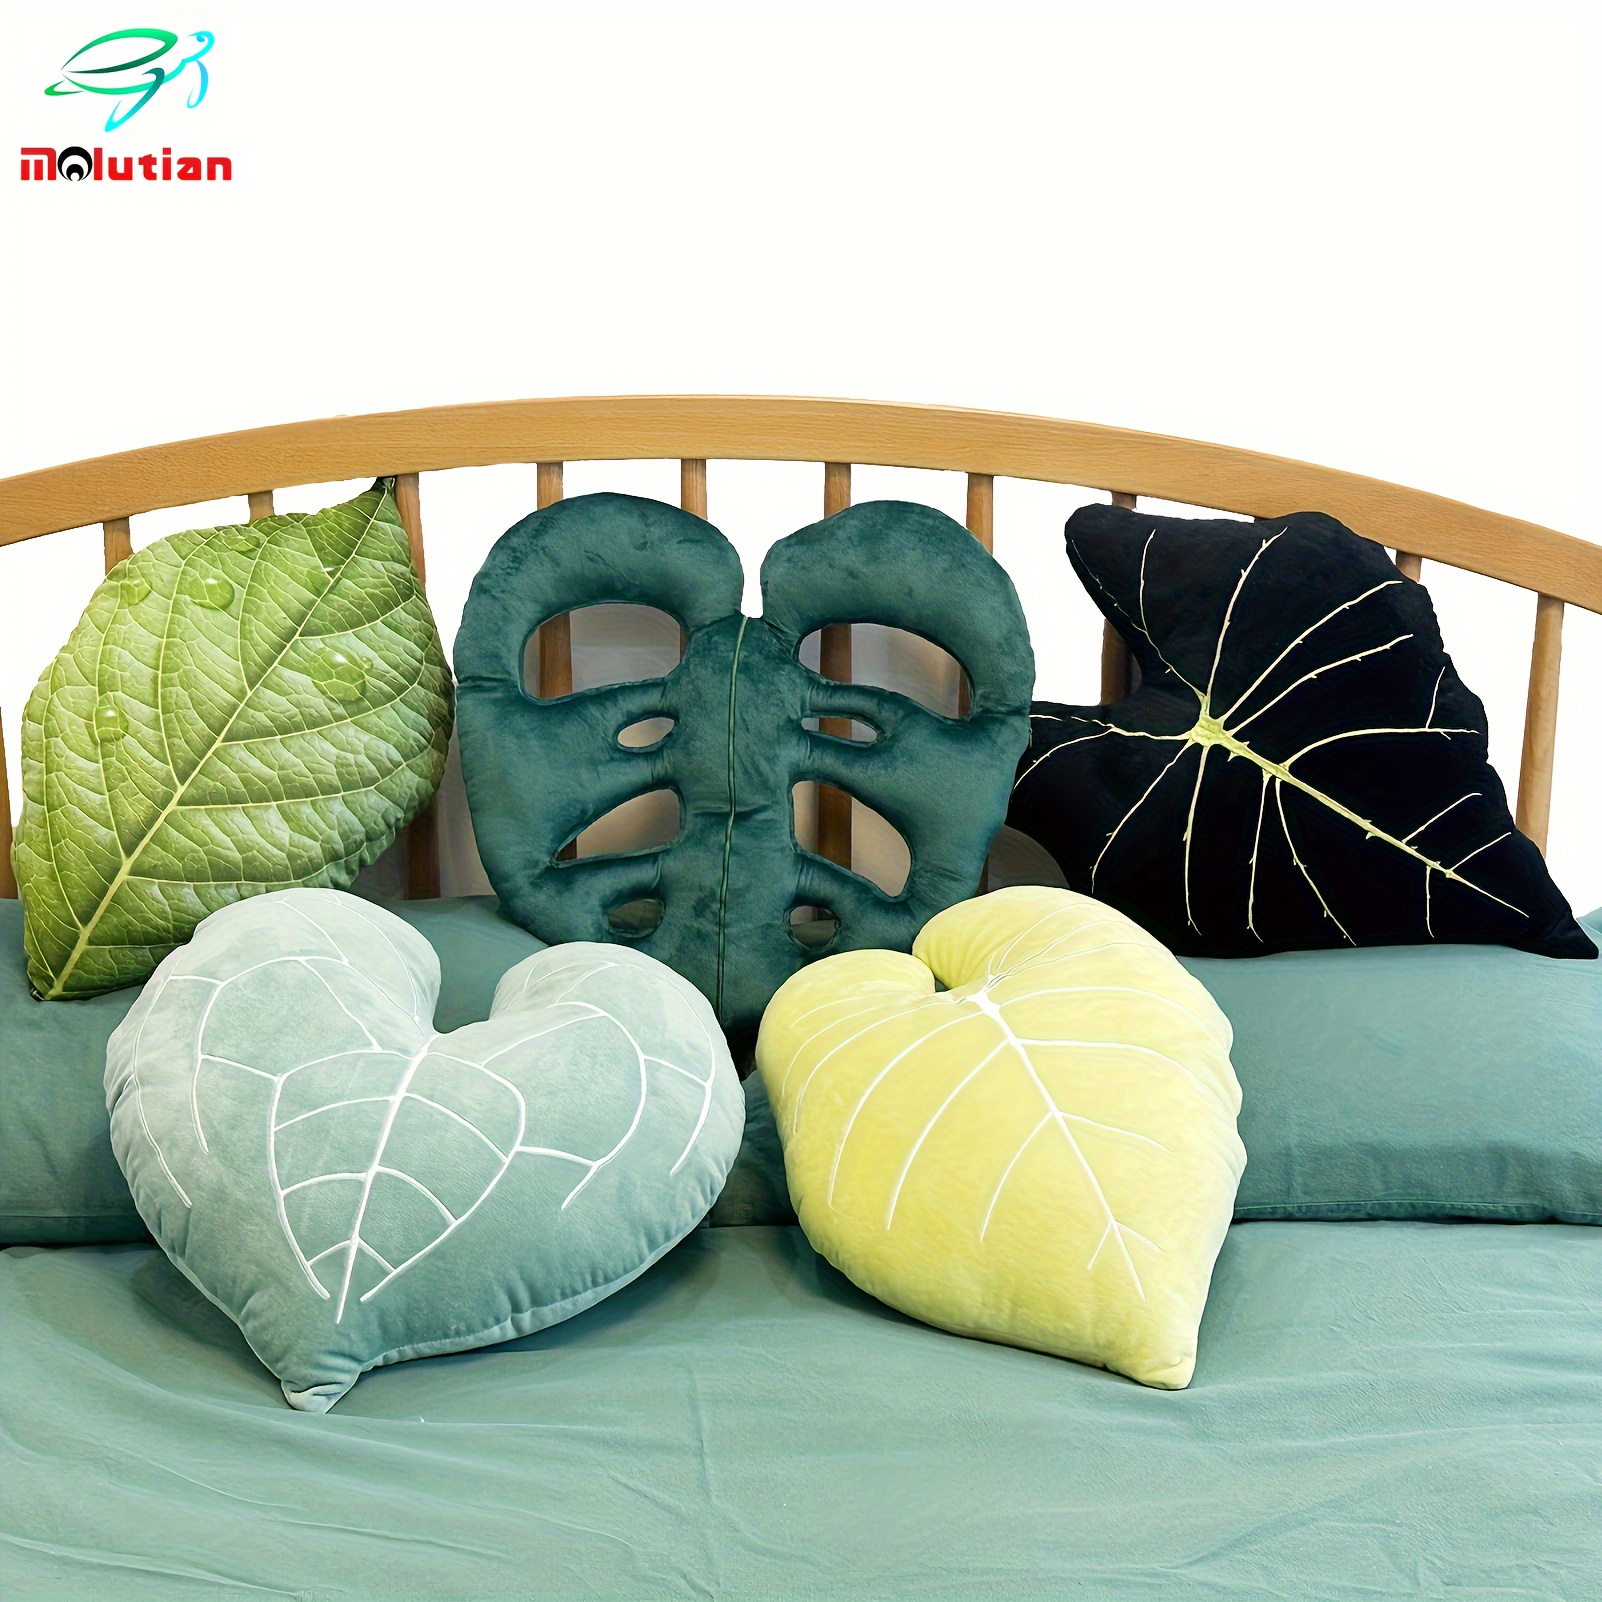 

5 Style Leaf Plush 3d Leaft Pillow 3d Accent Monstera Deliciosa Deep Forest Throw Pillow For Couch Sofa Living Room Home Decor Gift For Plant Lovers Halloween Decor Thanksgiving、christmas Gift